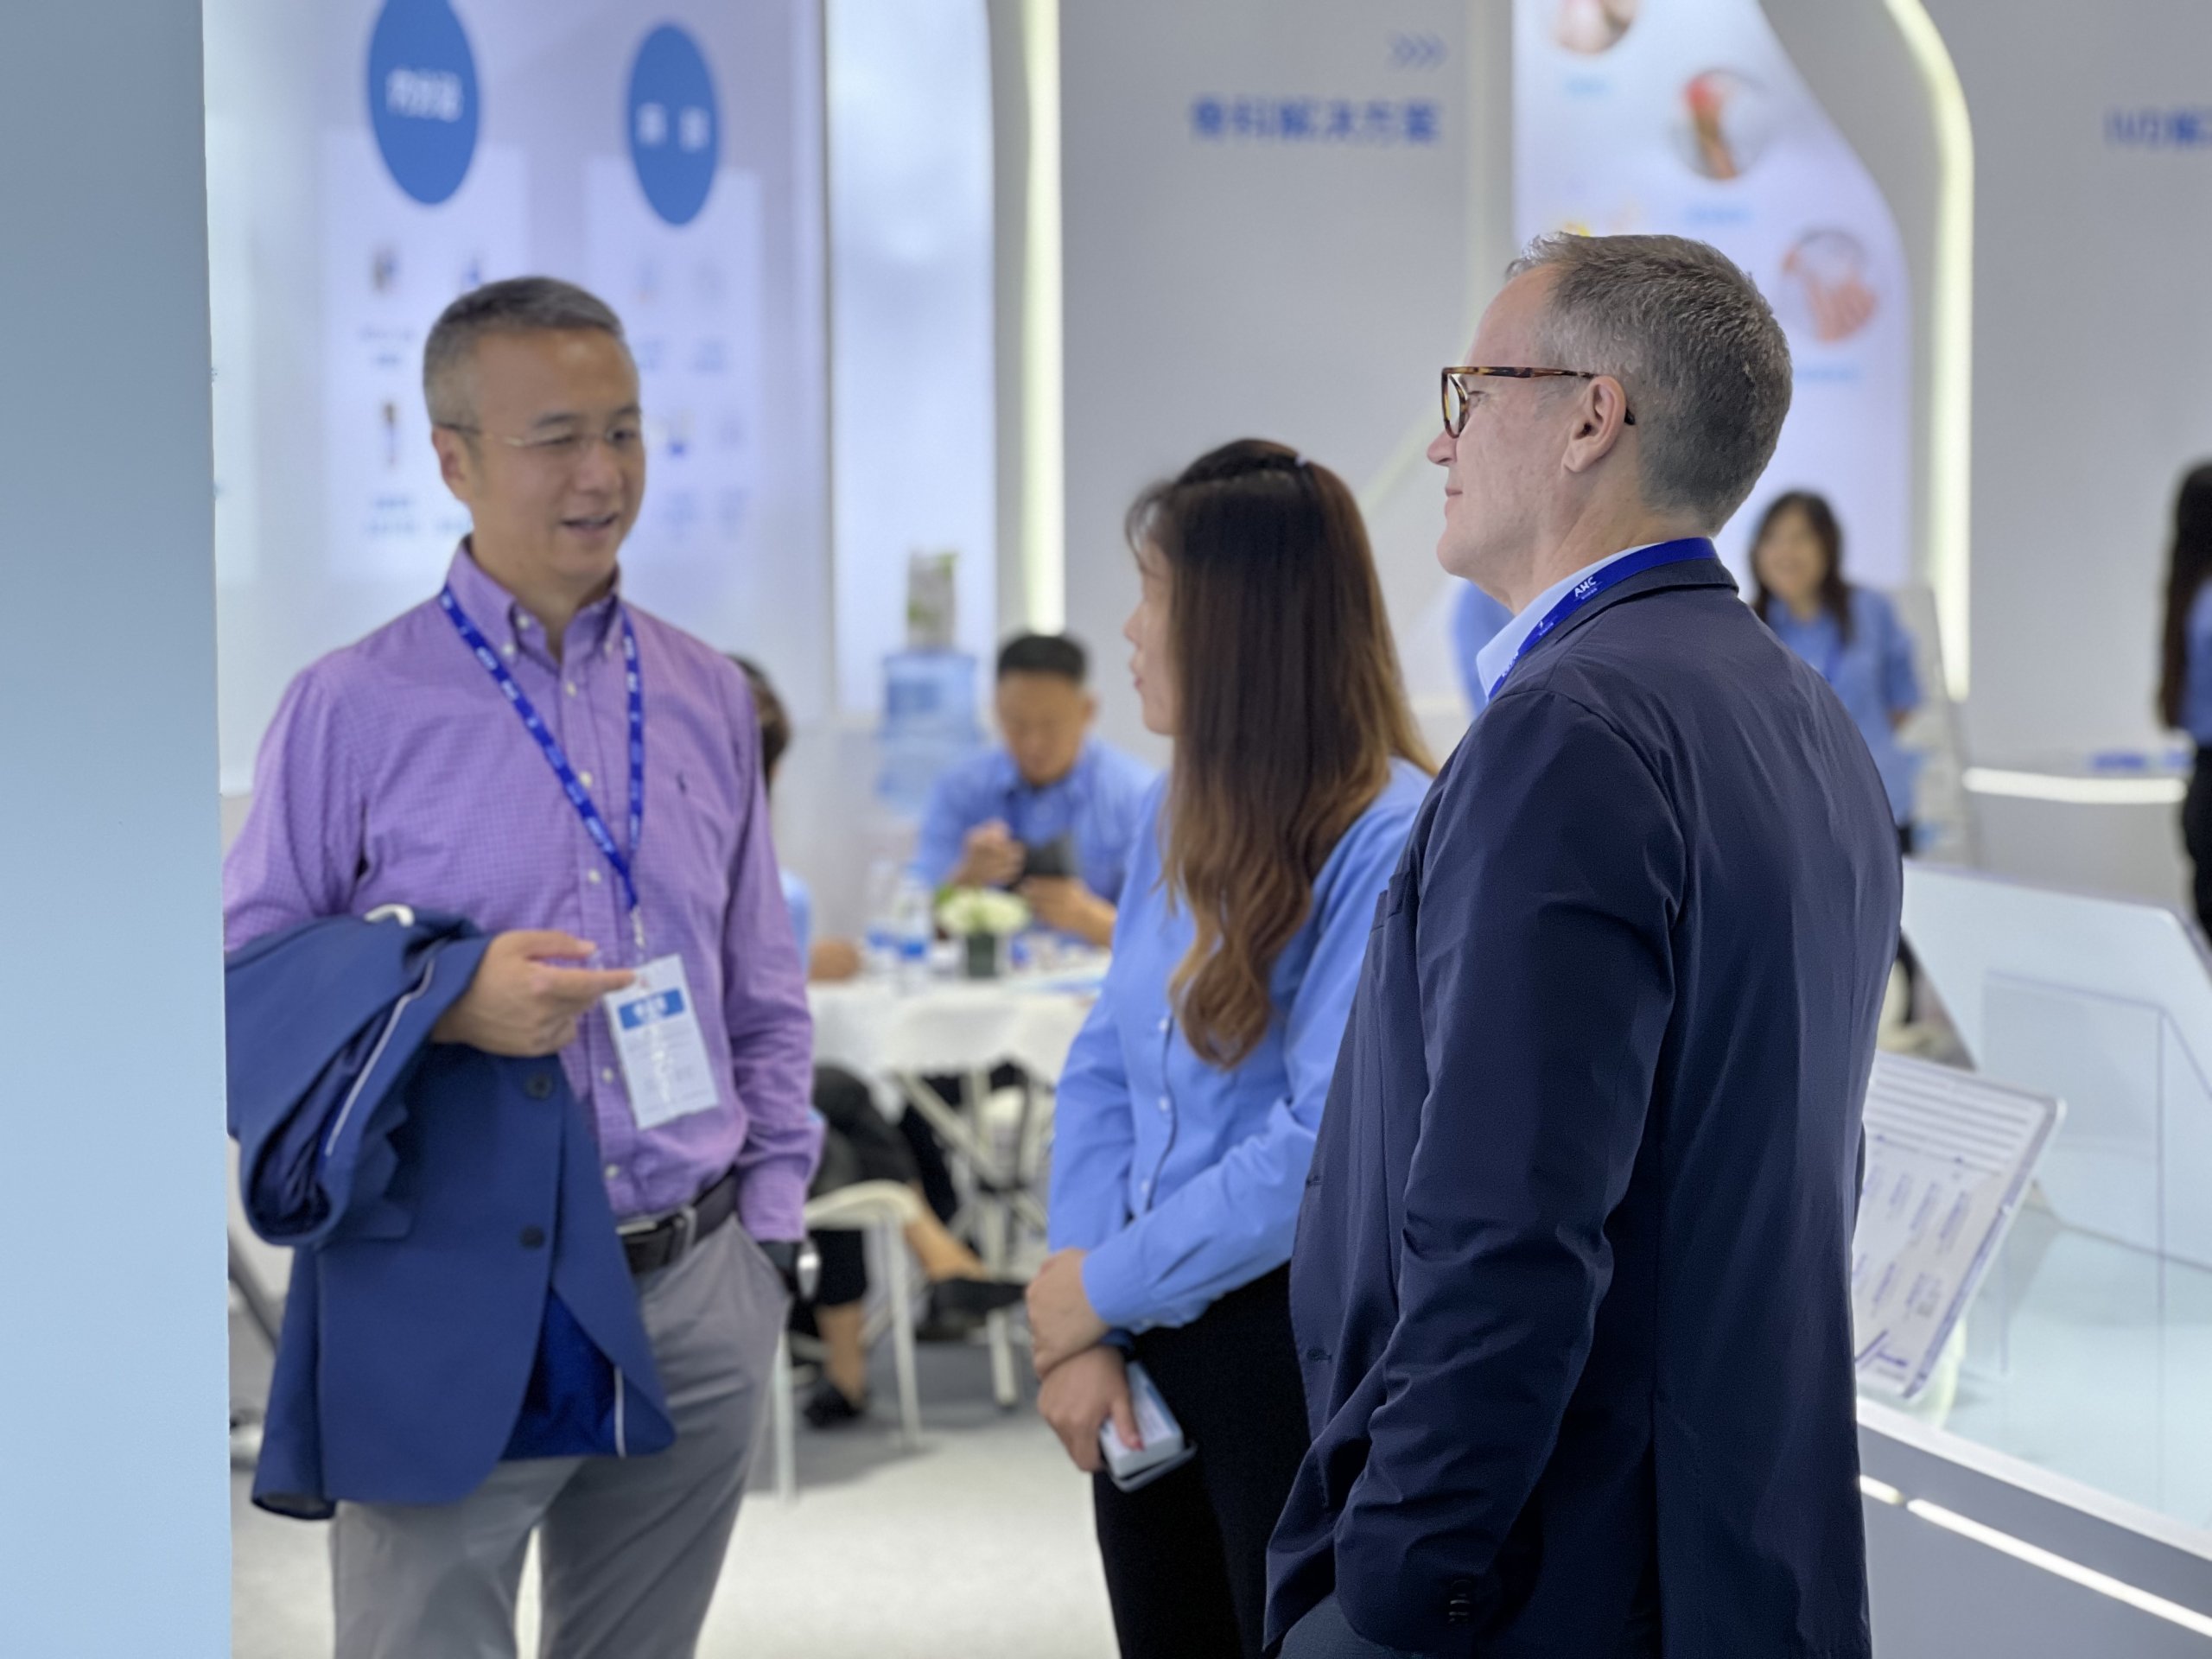 WEGO Medical employees talk to customers at the CMEF exhibition